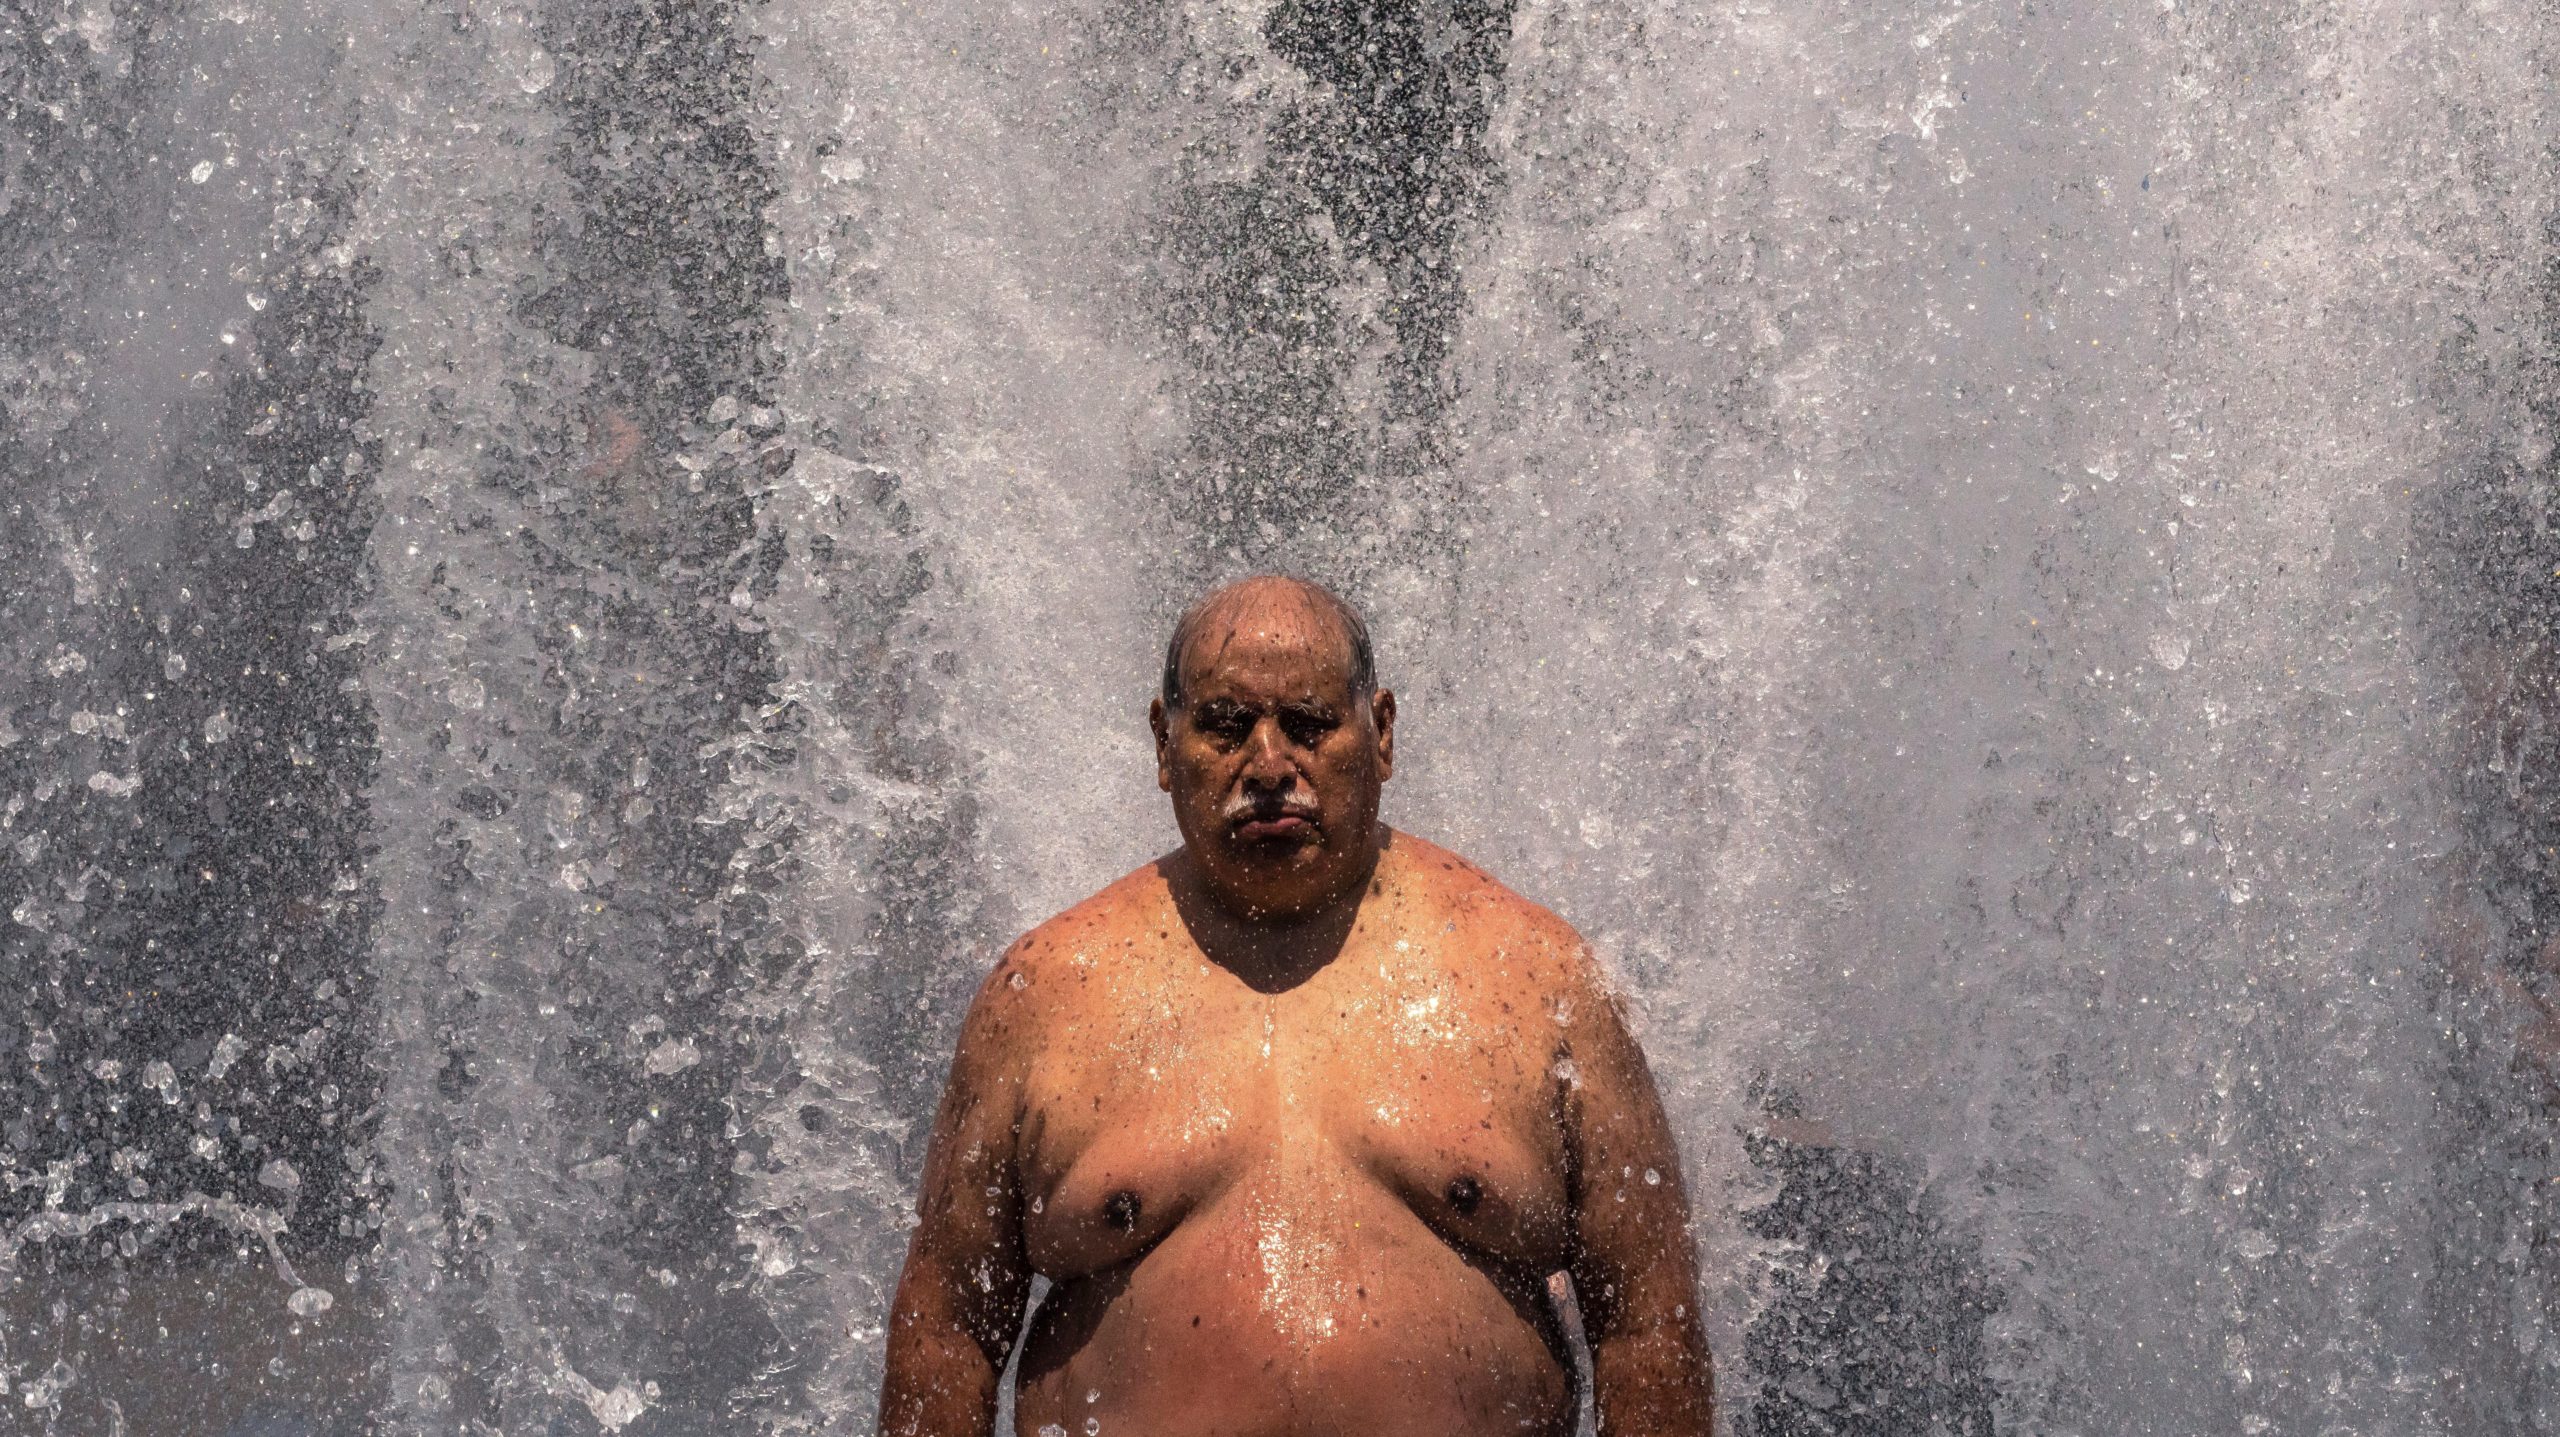 Pablo Miranda cools off in the Salmon Springs Fountain on June 27, 2021, in Portland, Oregon. Record-breaking temperatures lingered over the Northwest during a historic heatwave this weekend.  (Photo: Credit Nathan Howard, Getty Images)